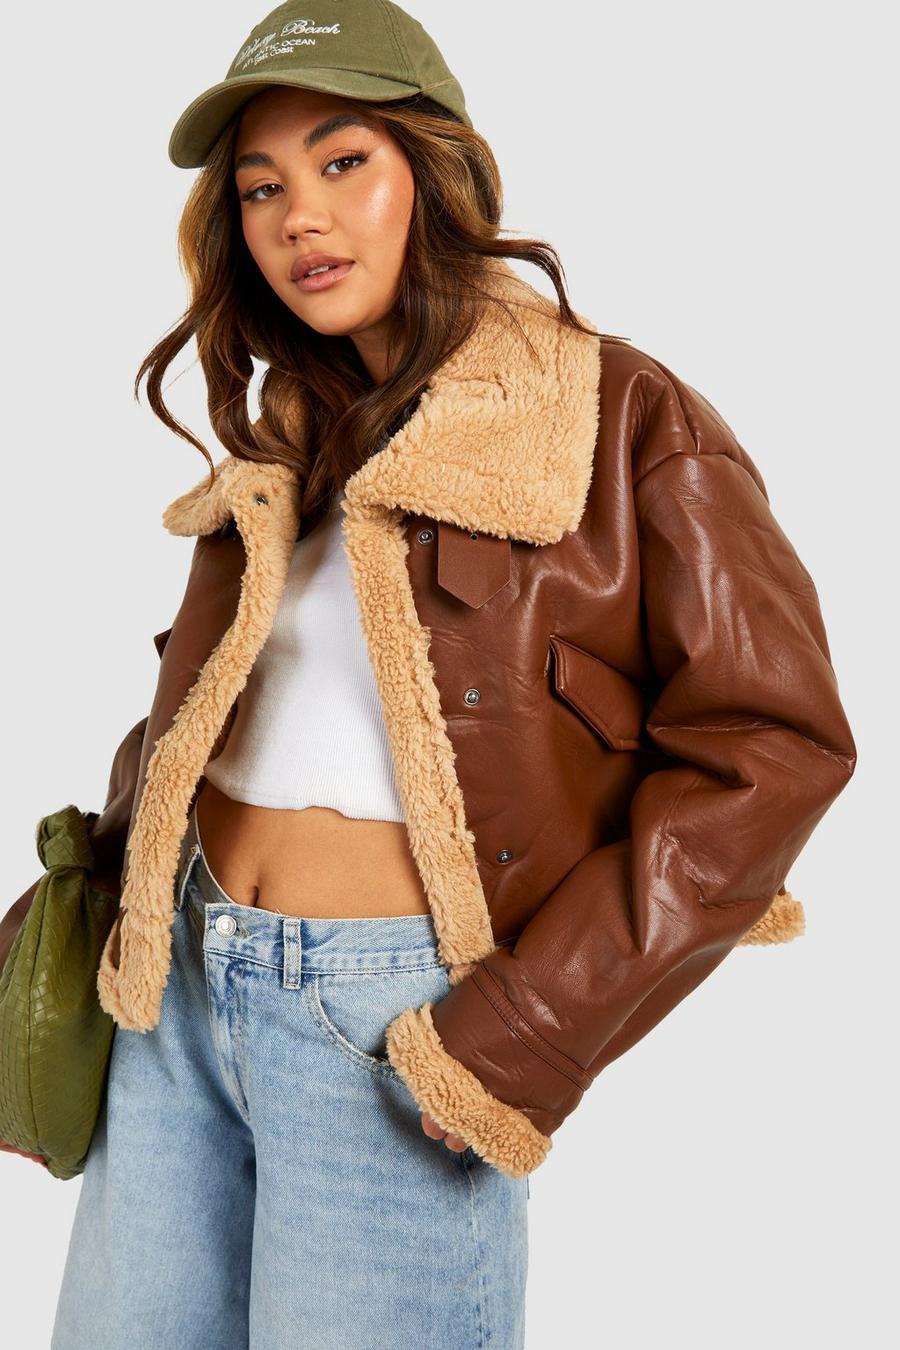 Winter Clothing 2023 | Women's Winter Outfits | boohoo UK